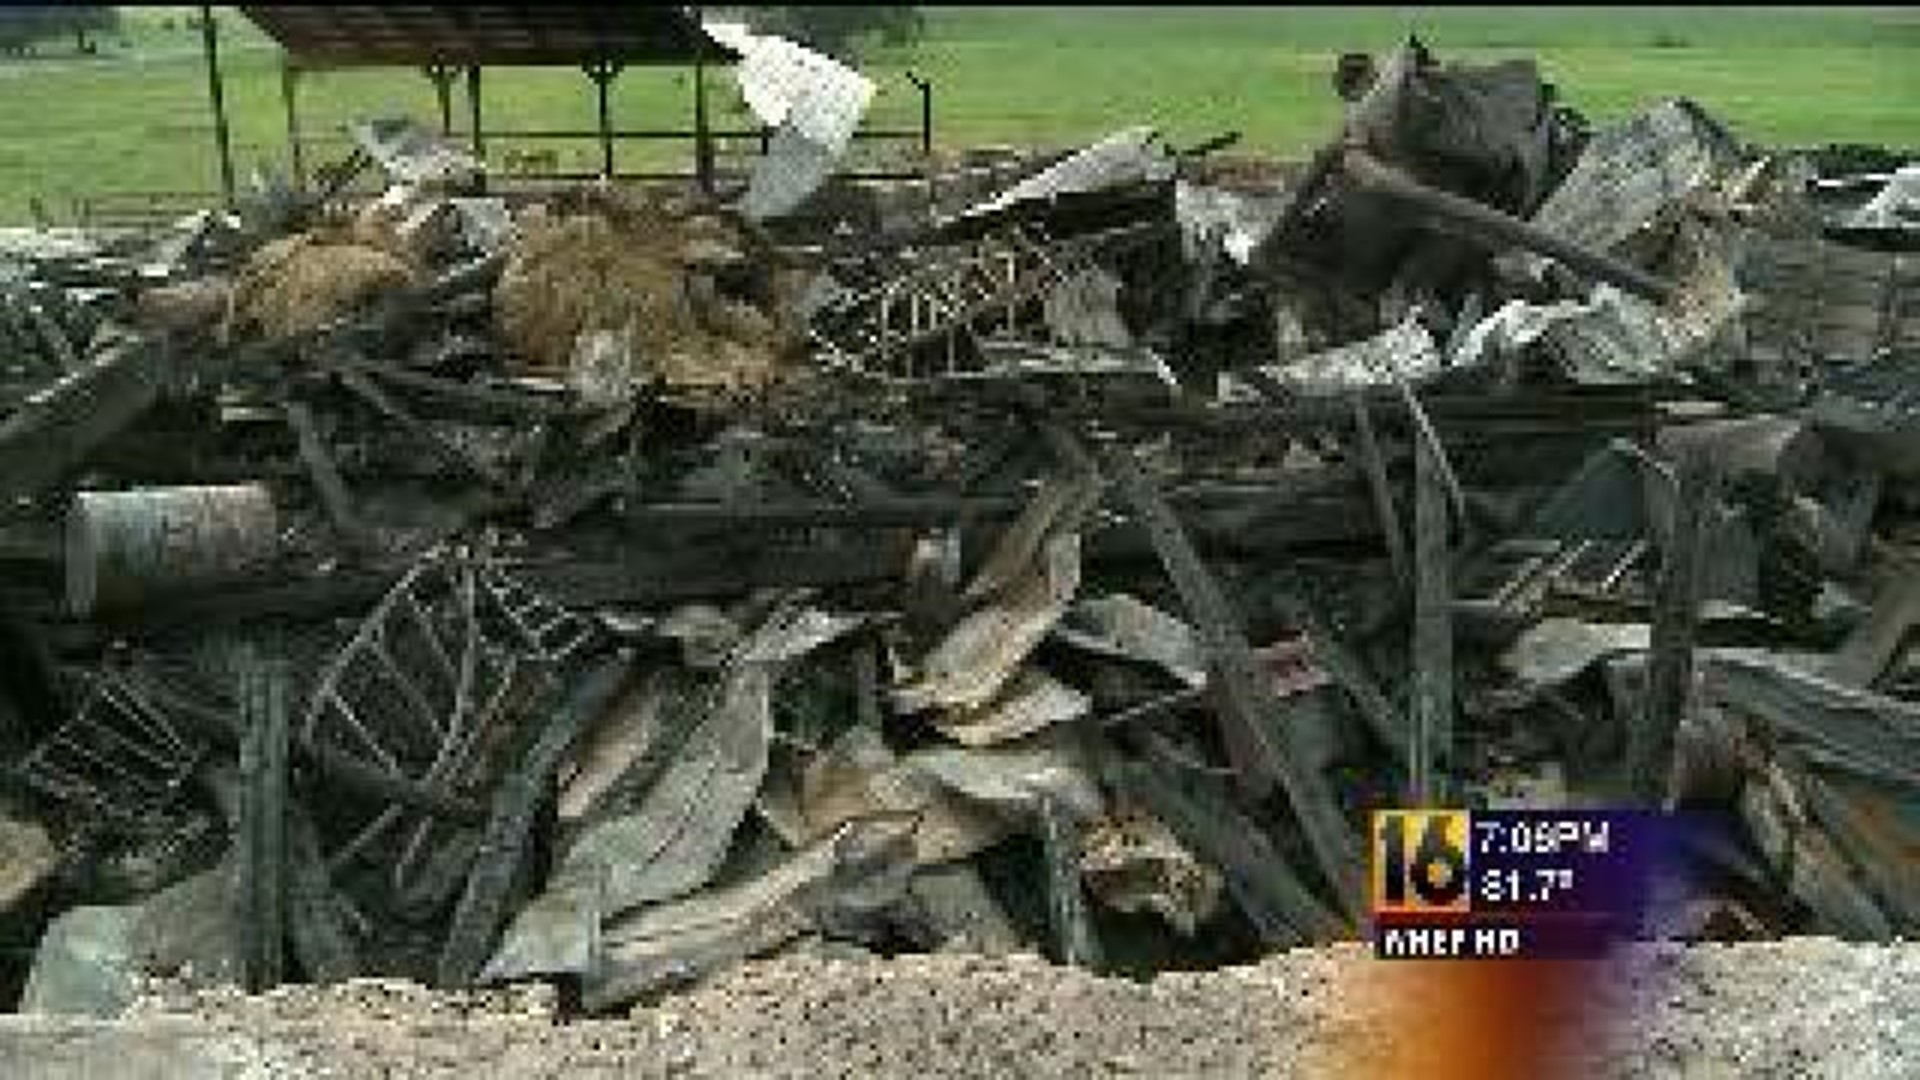 Family Loses Pets & Barn in Fire